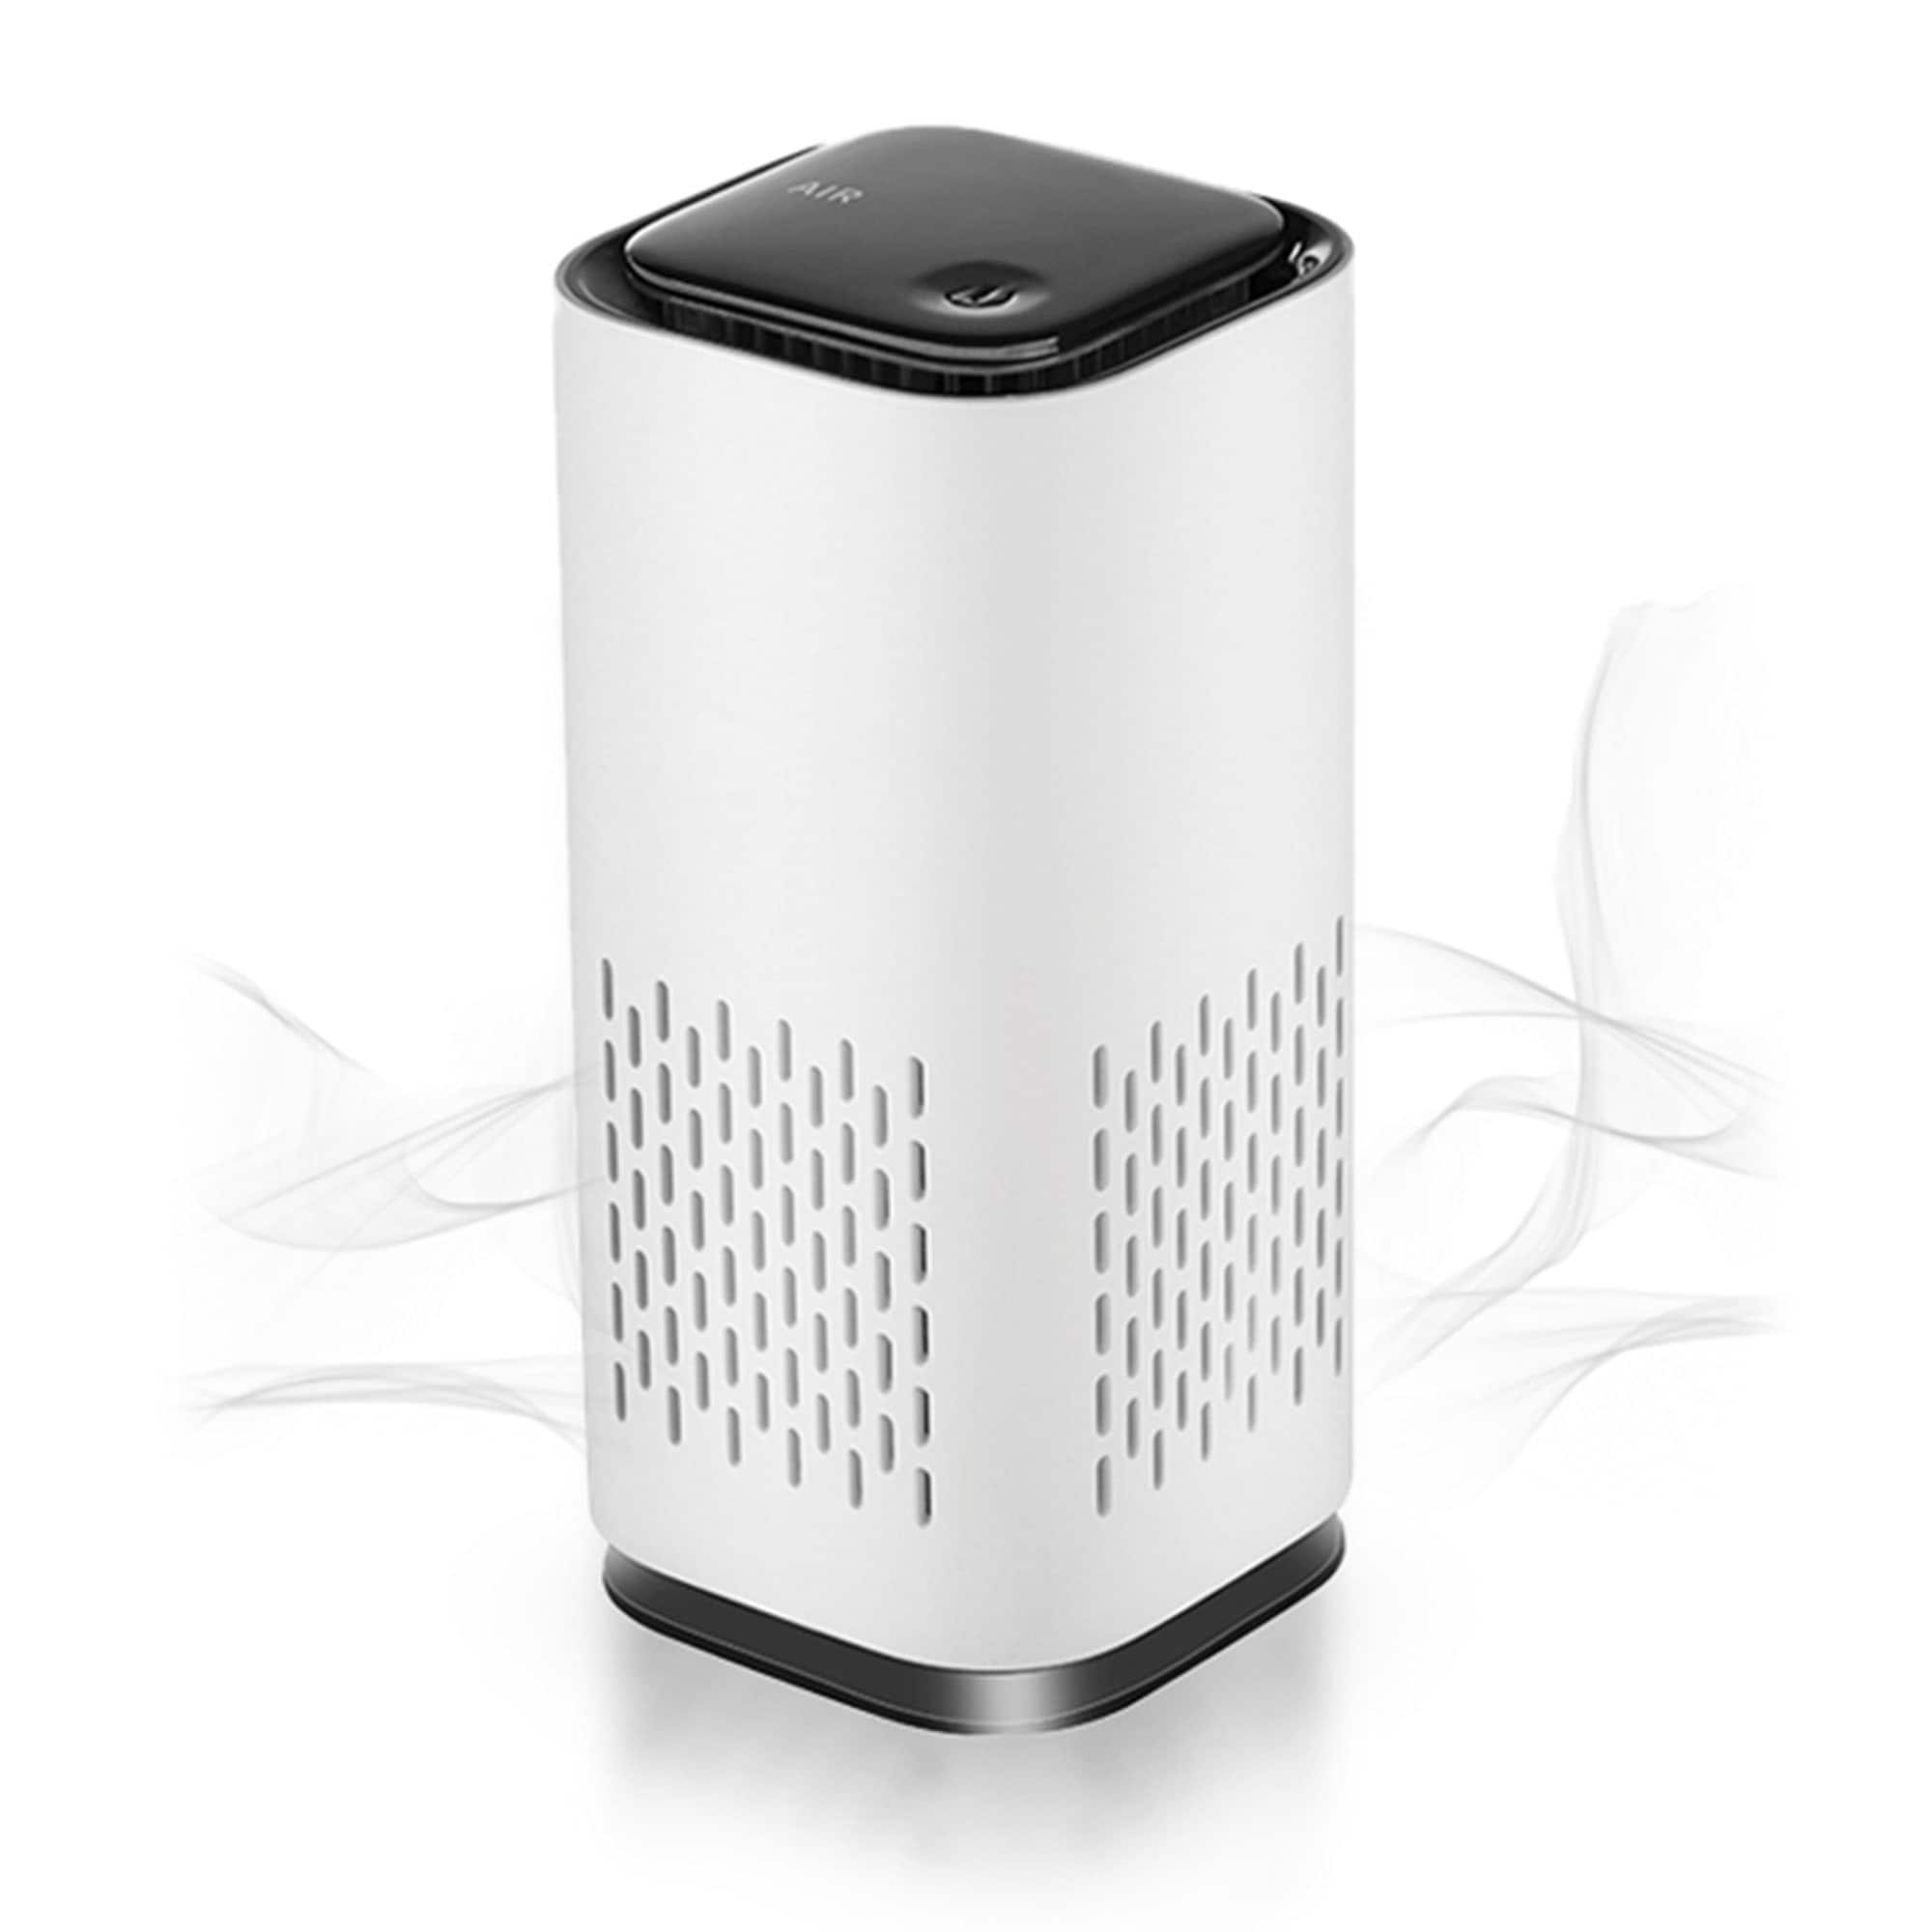 LEVOIT Air Purifier for Home Bedroom, Smart WiFi Alexa Control, Covers up  to 915 Sq.Foot & Essential Oil Diffuser, Aromatherapy Diffuser for  Essential